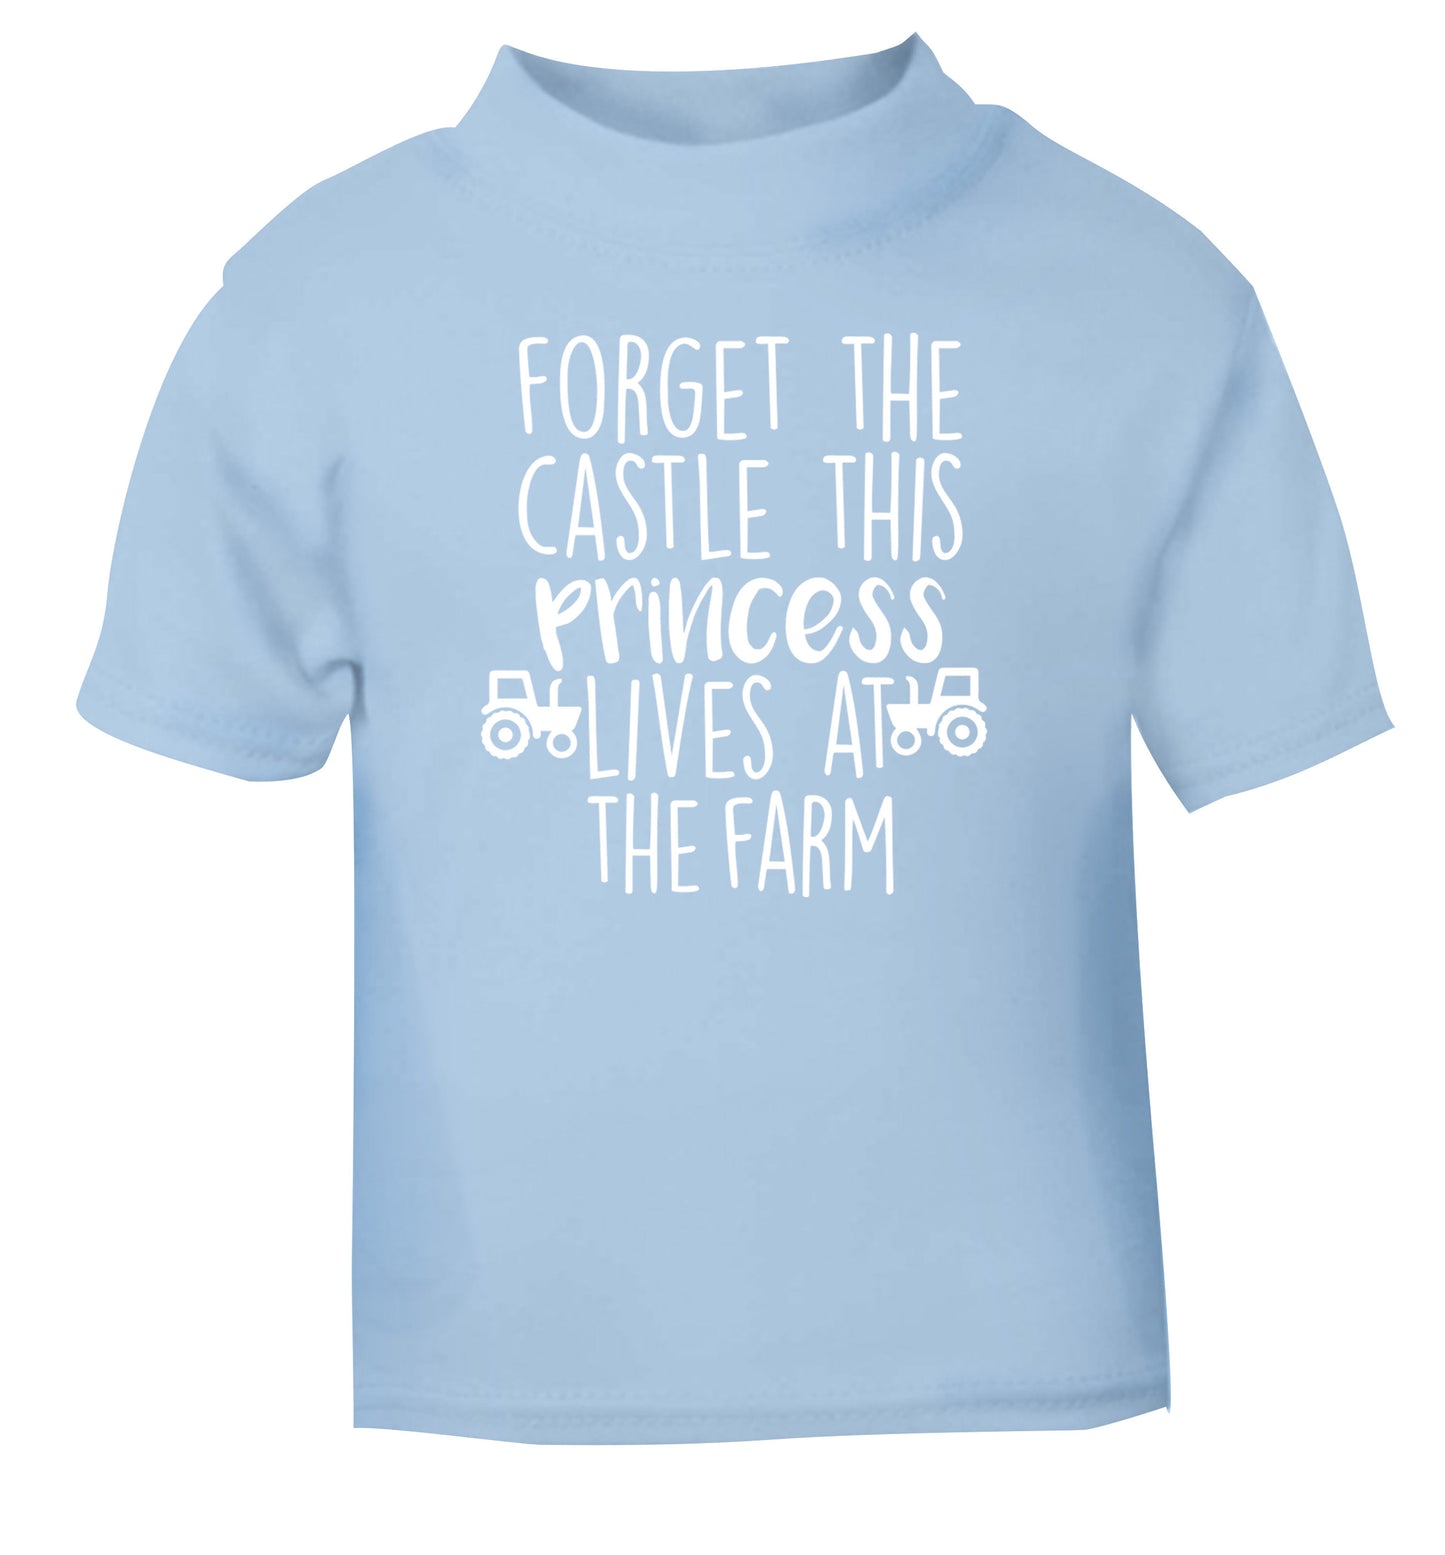 Forget the castle this princess lives at the farm light blue Baby Toddler Tshirt 2 Years